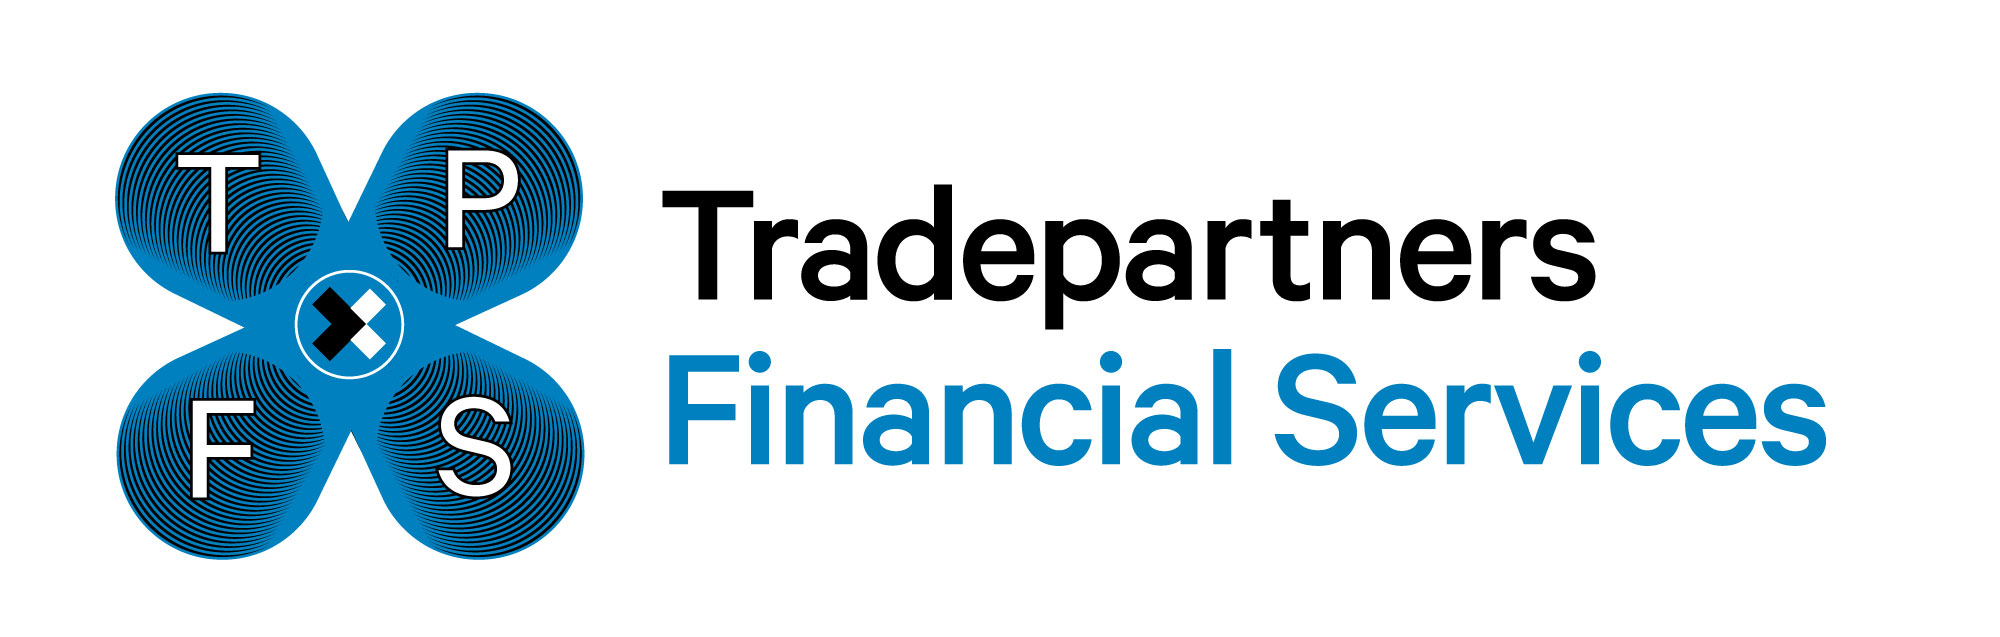 Tradepartners Financial Services